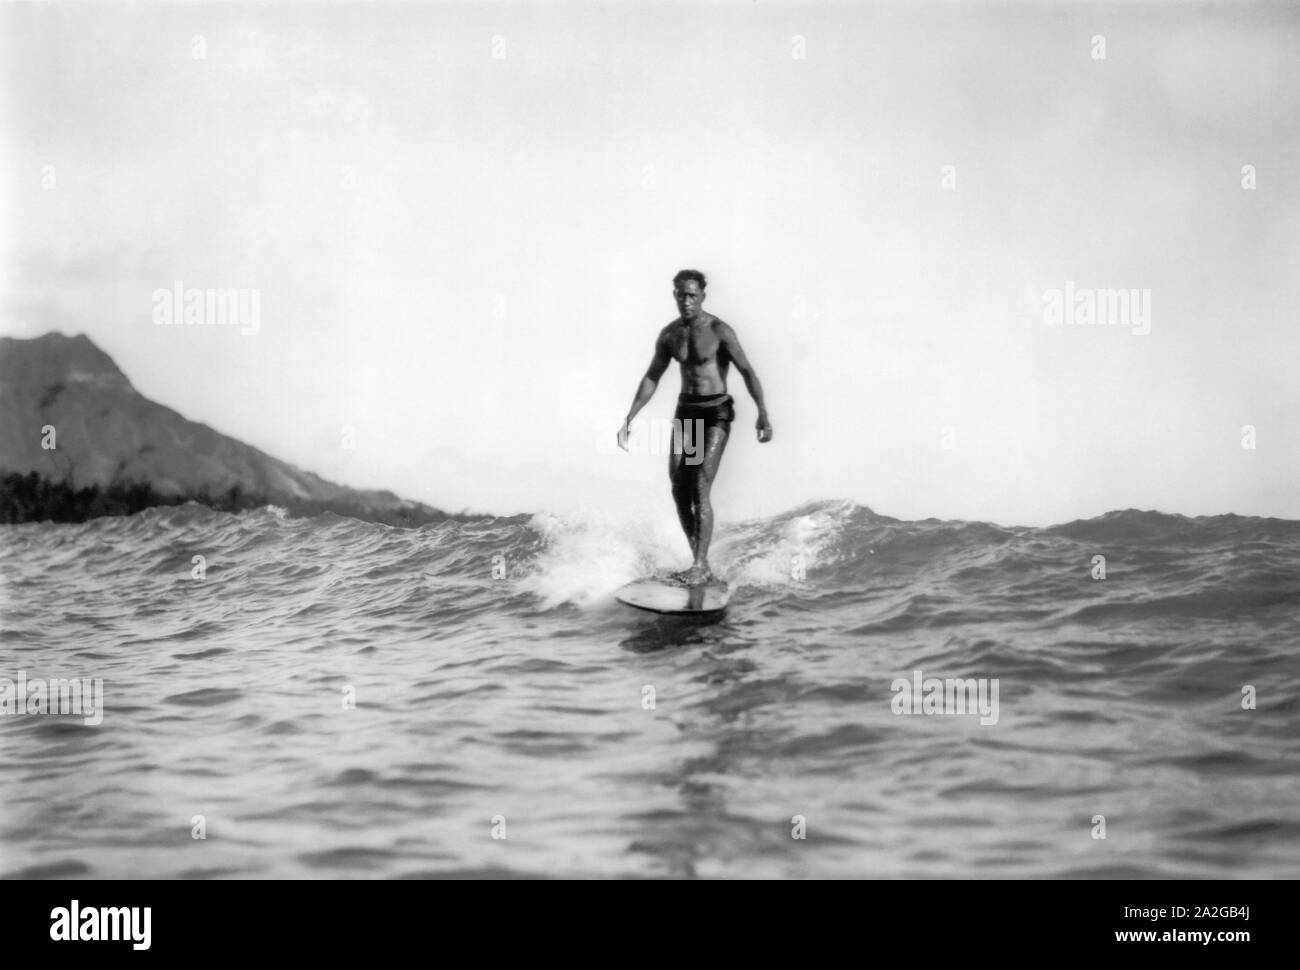 Olympic Gold Medal swimmer and Father of Modern Surfing, Duke Kahanamoku, riding a wave on a wooden surfboard in Waikiki, Hawaii with Diamond Head in the background. Stock Photo